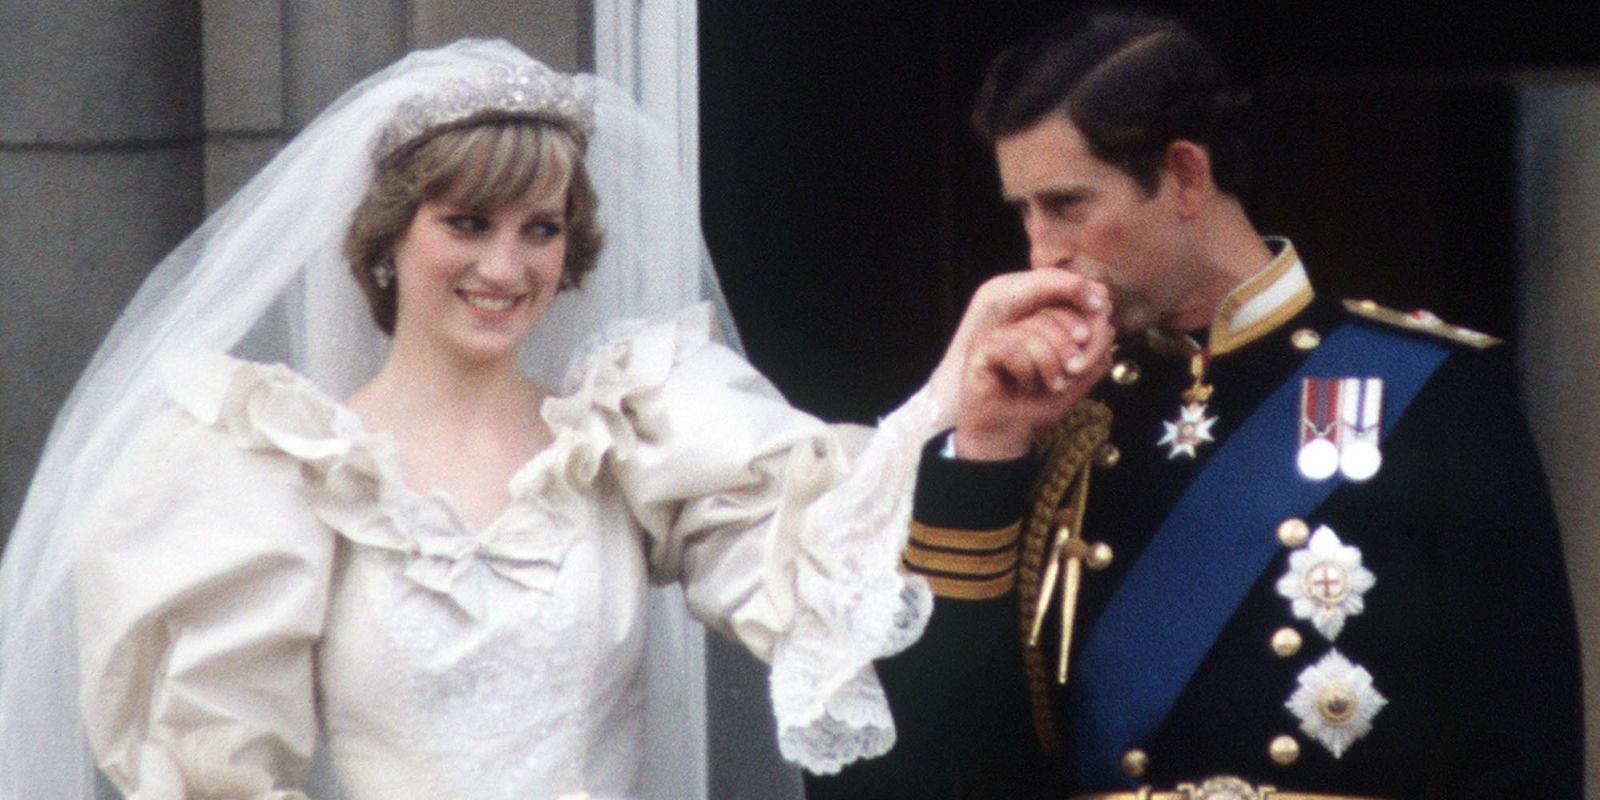 princess diana ring price: The mystery of Princess Diana's missing ring  worth $465,000 - The Economic Times